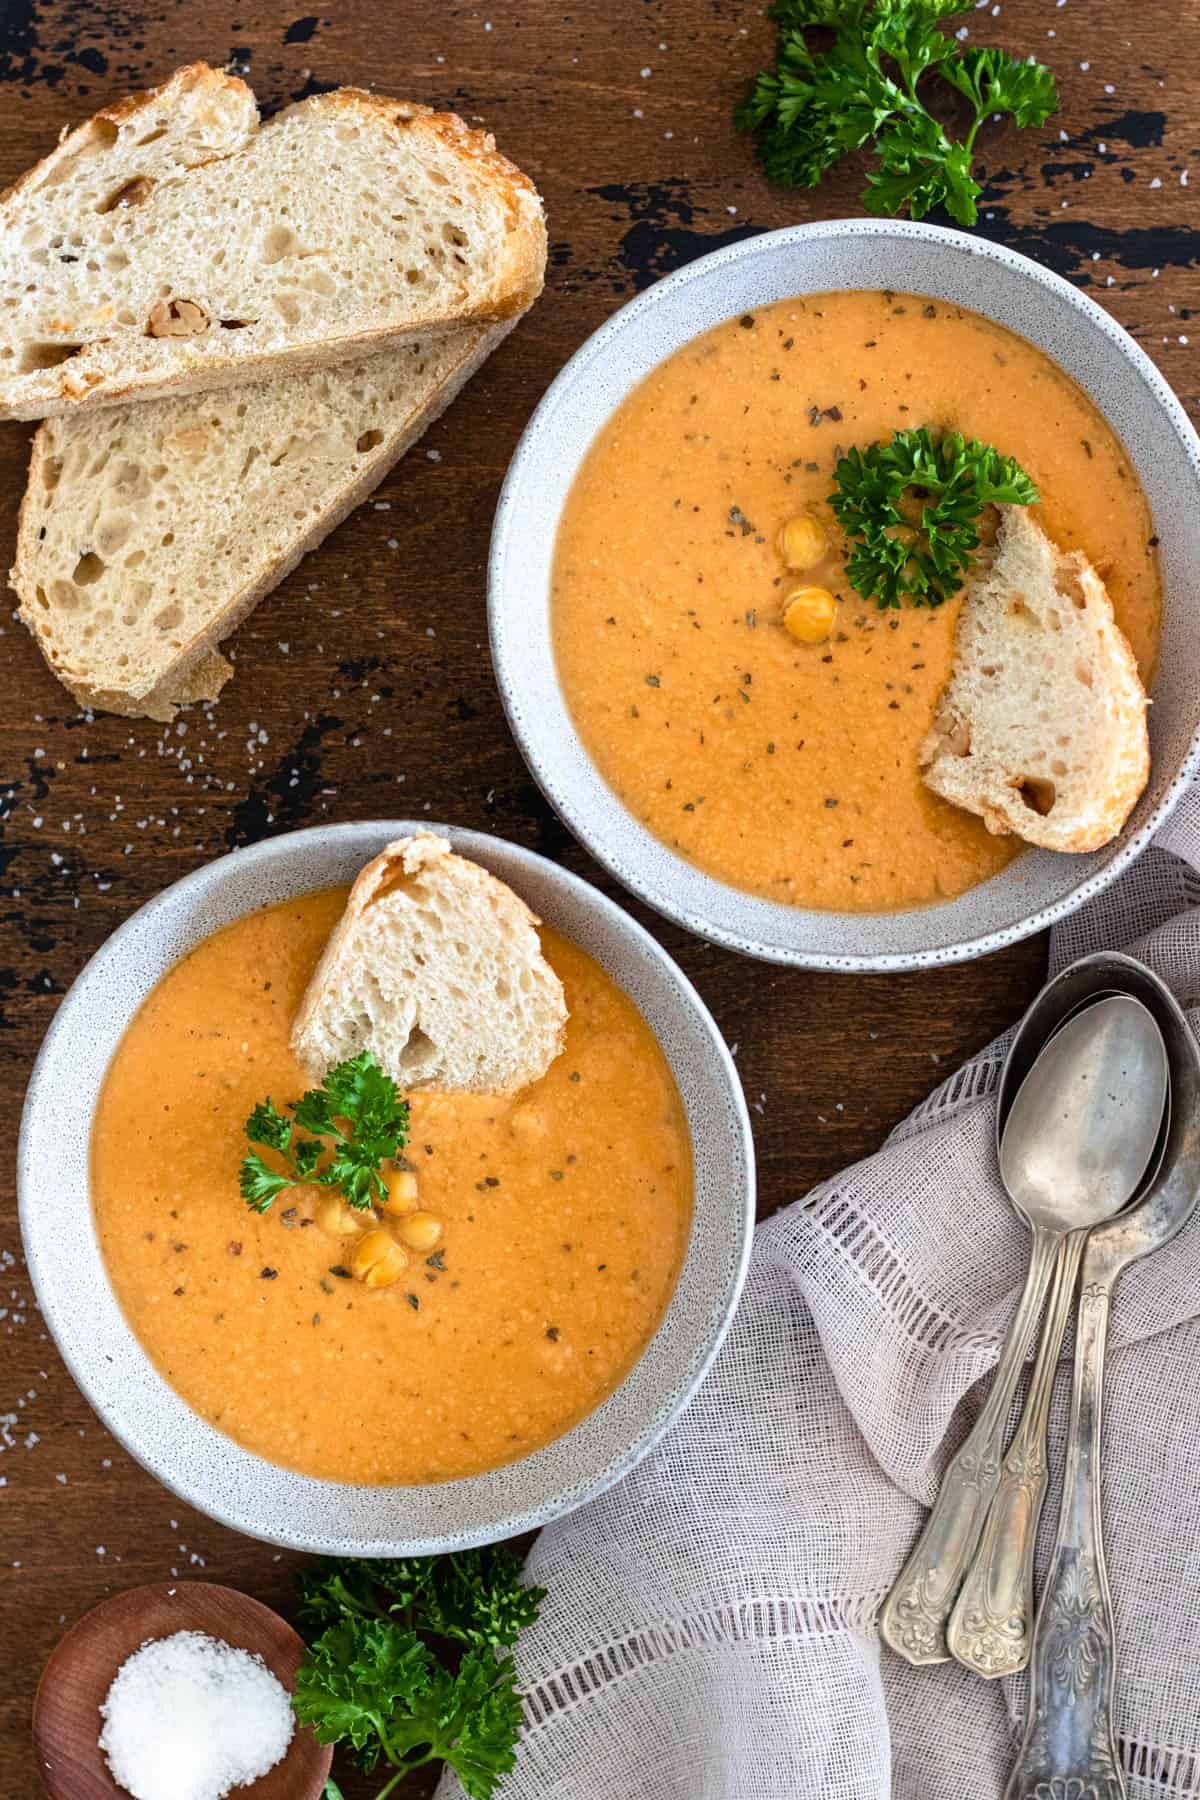 Top view of two bowls of soup served with whole chickpeas on top as garnish and slices of bread on the table next to them. 